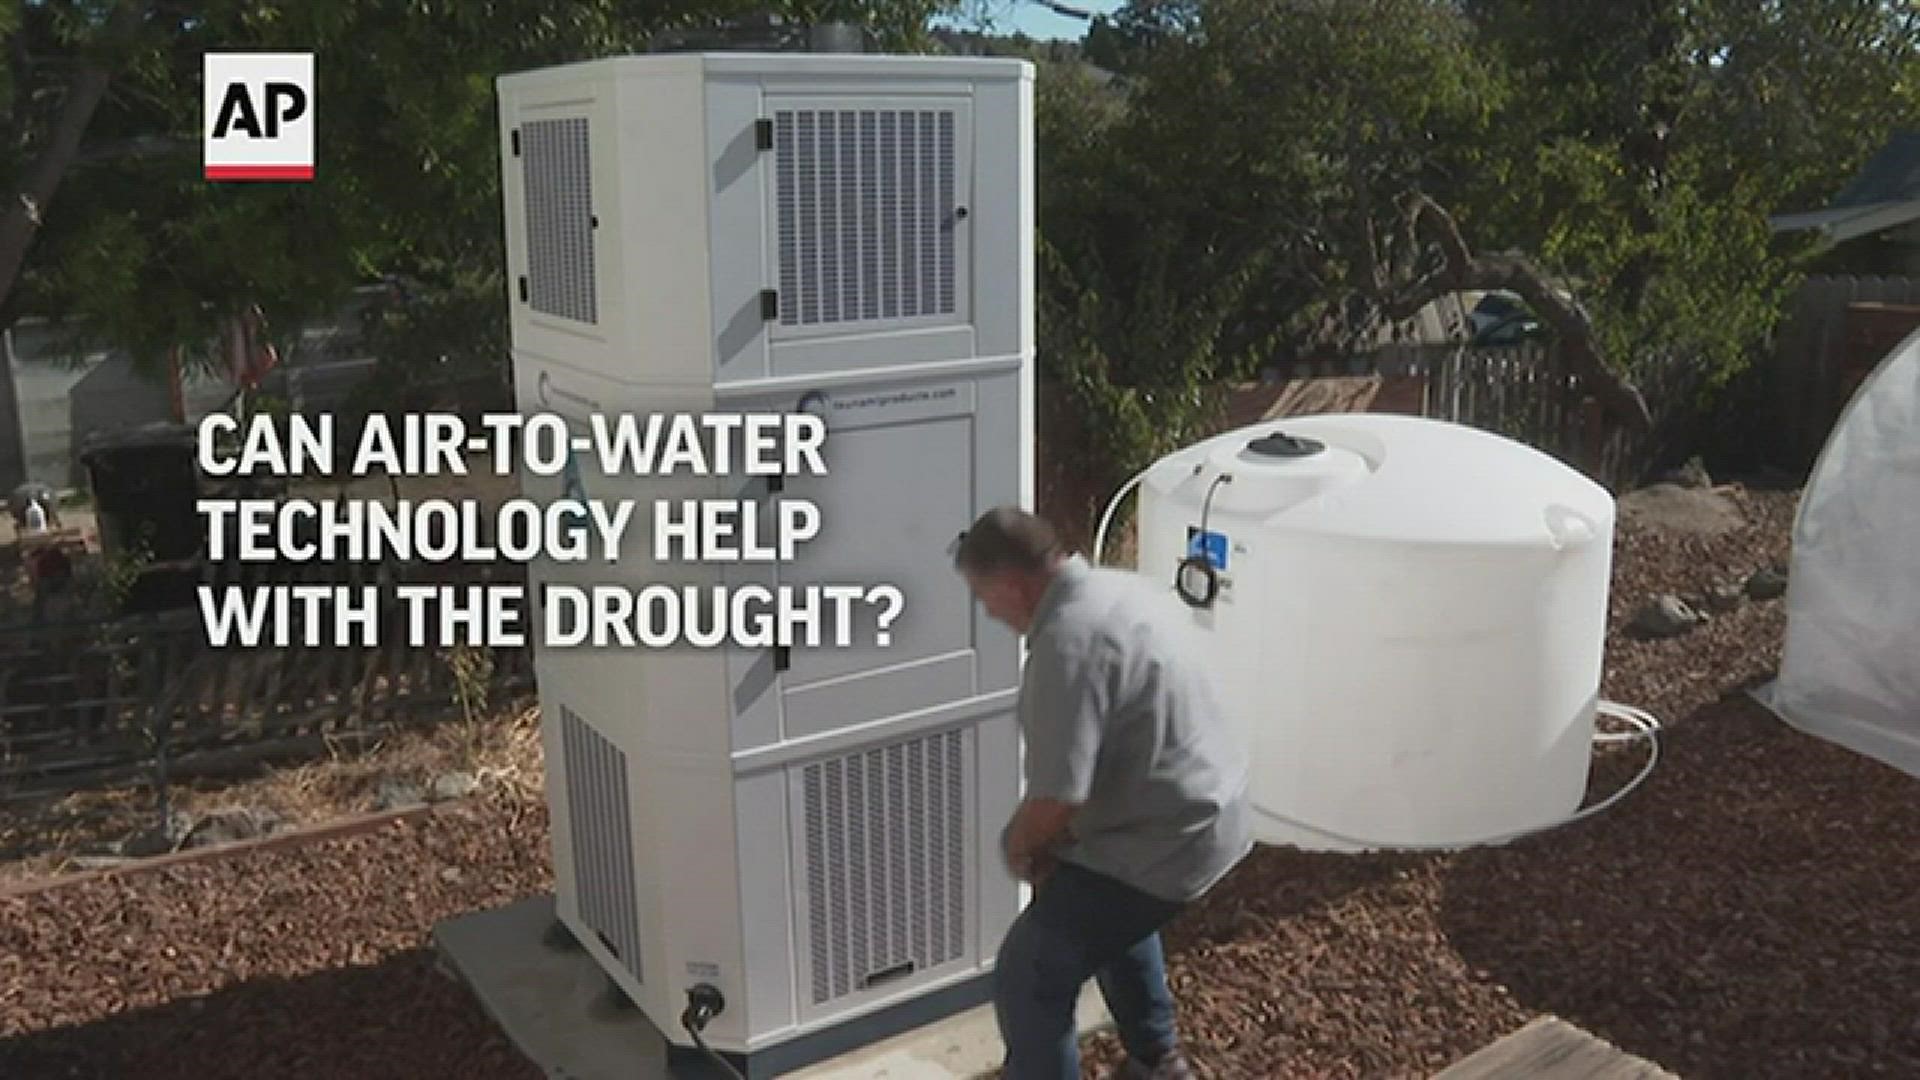 Some in the drought-stricken West are turning to machines which the developers say can produce hundreds of gallons of water a day pulled out of the air.